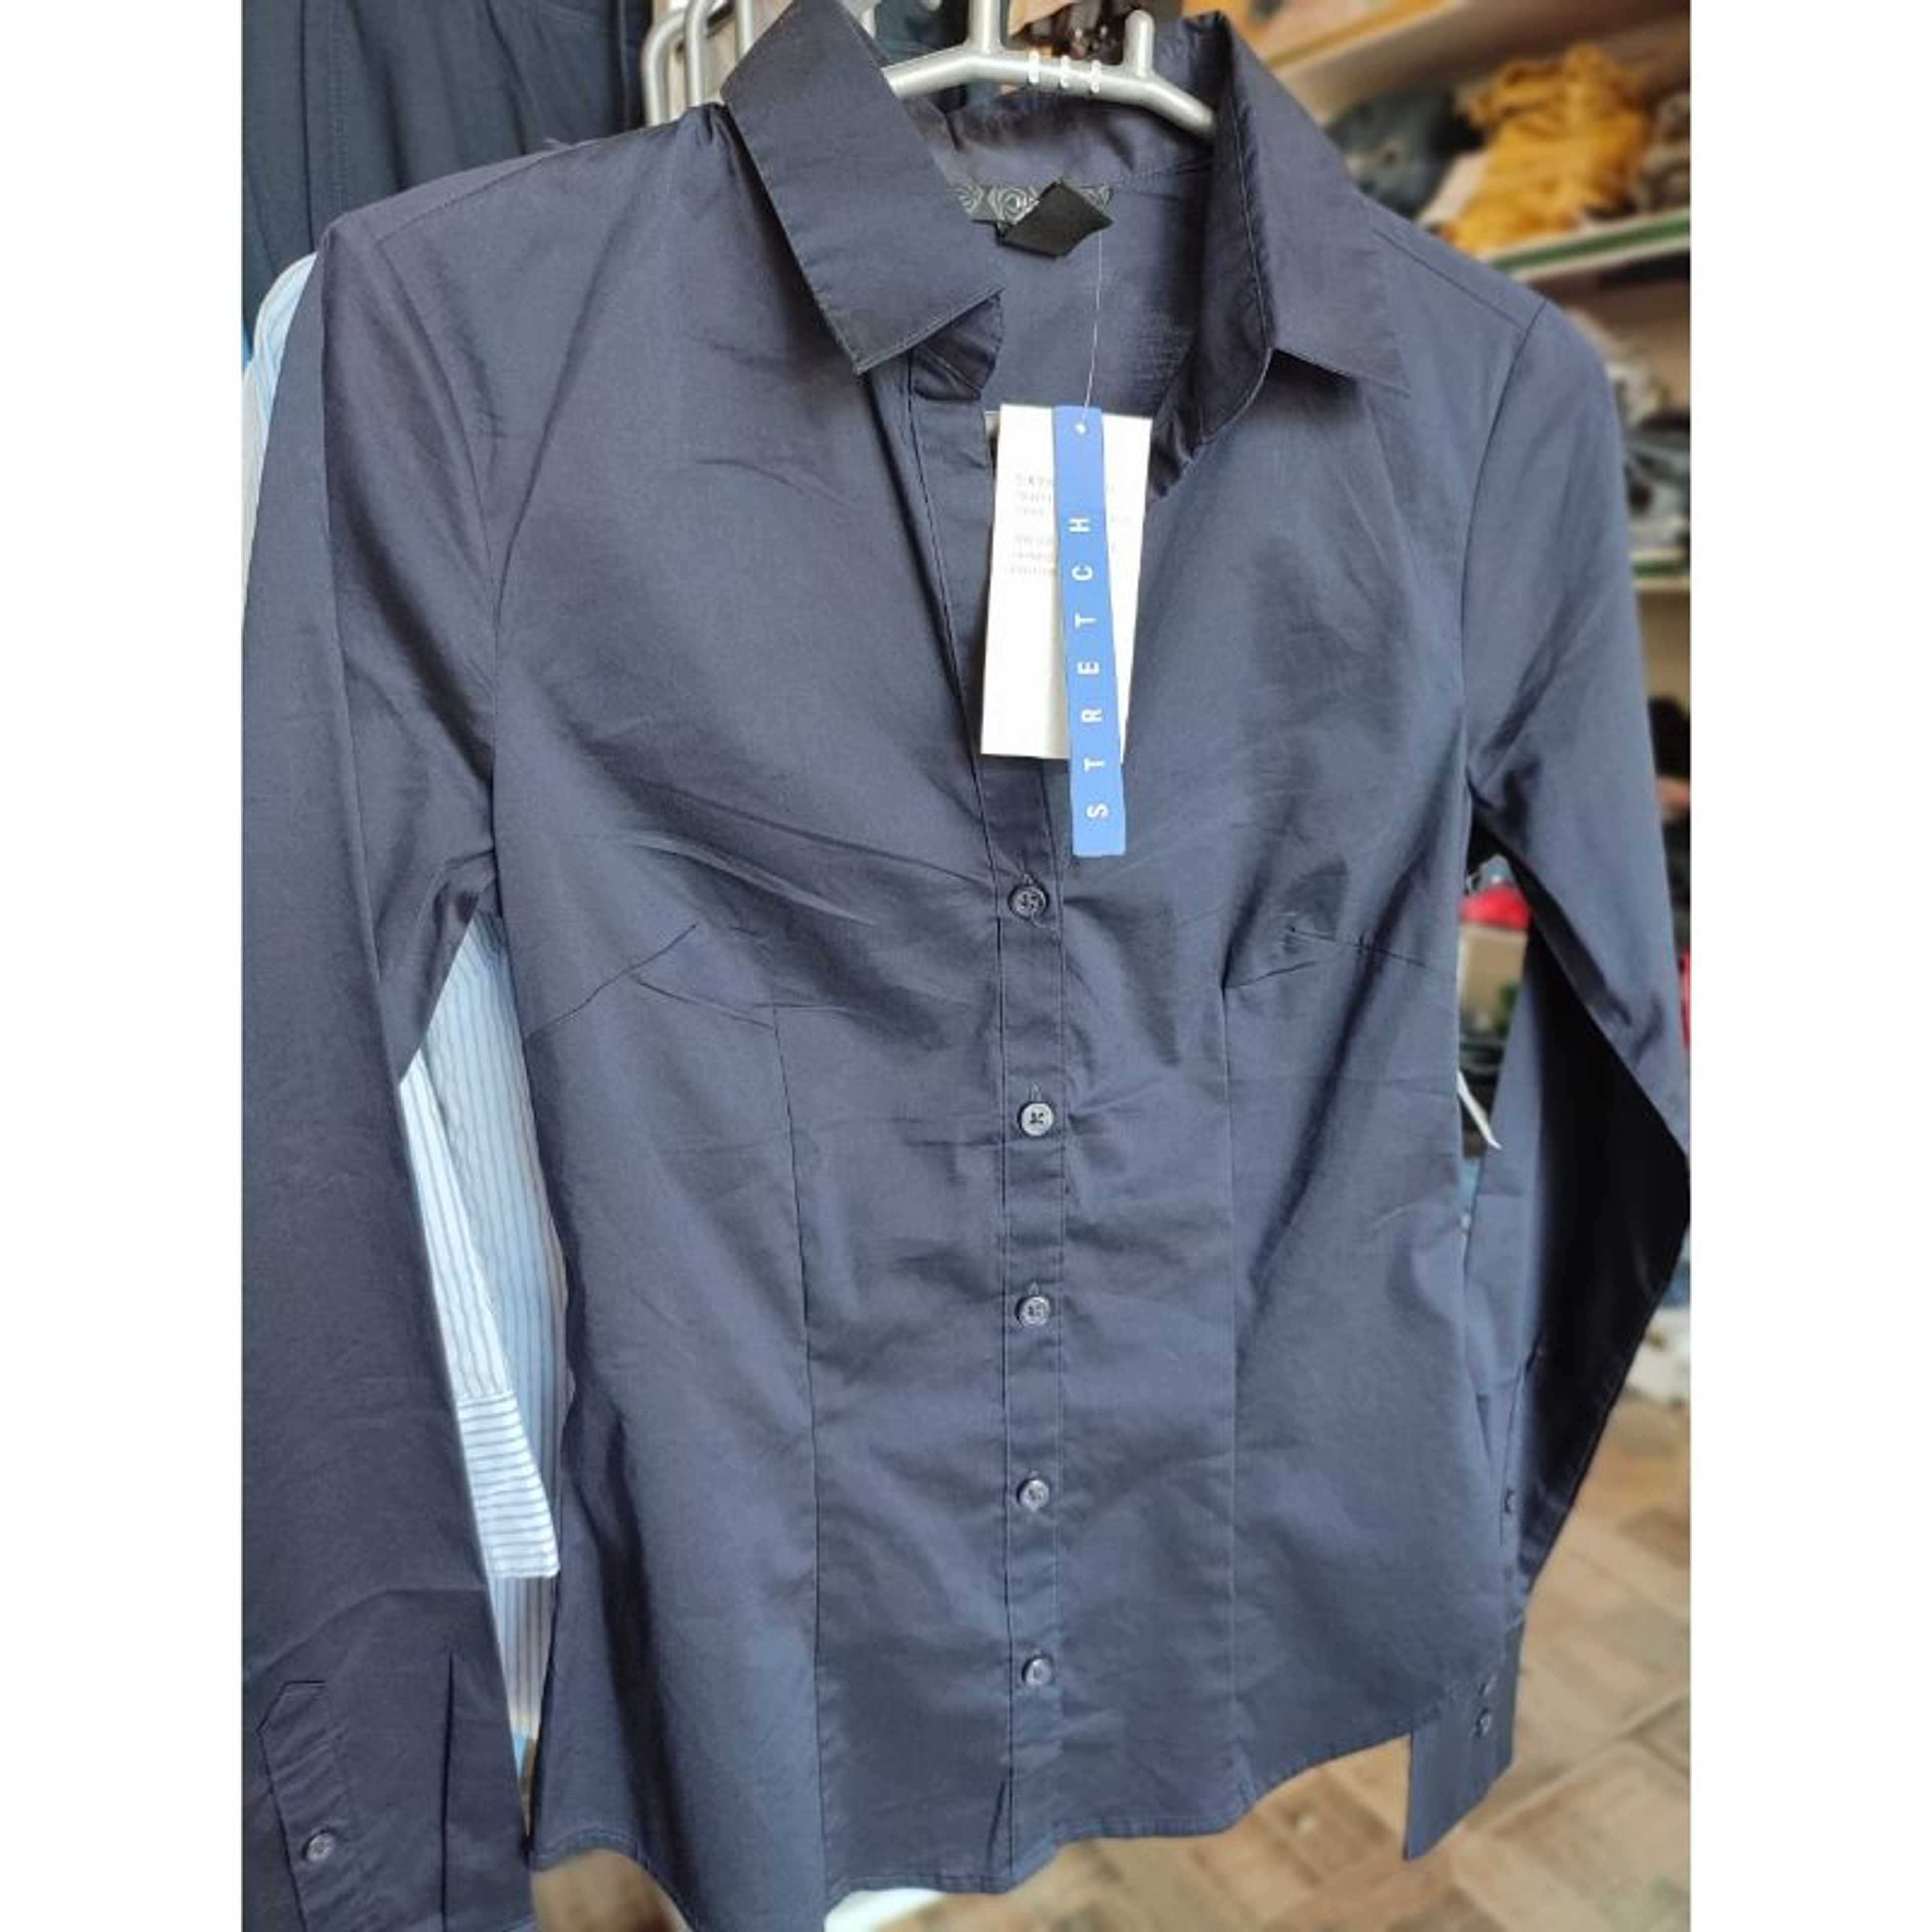 Girls formal shirts in Grey color